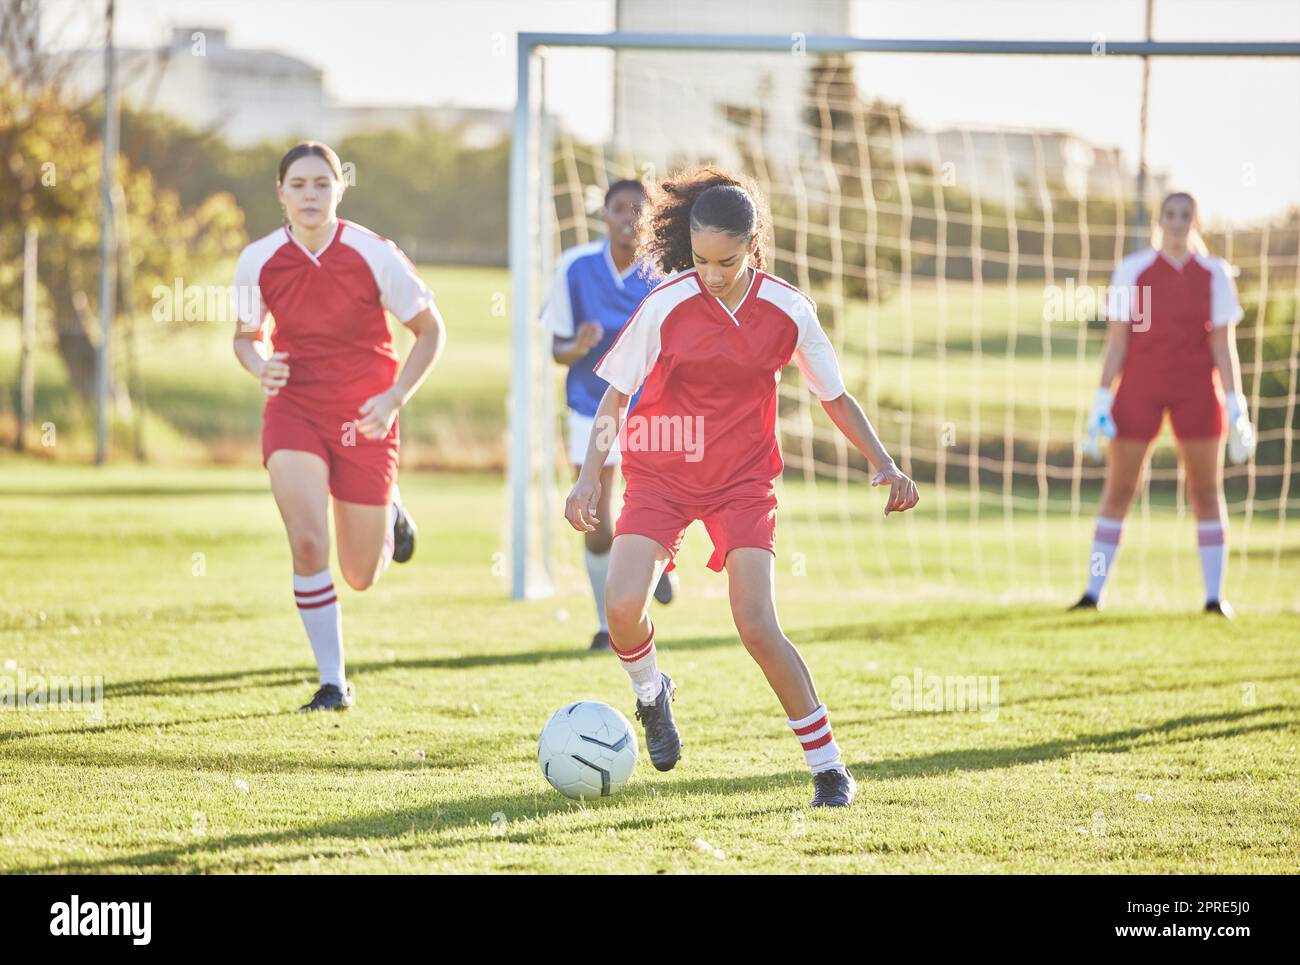 Female football, sports and girls team playing match on field while kicking, tackling and running with a ball. Energy, fast and skilled soccer players in a competitive game against opponents outdoors Stock Photo